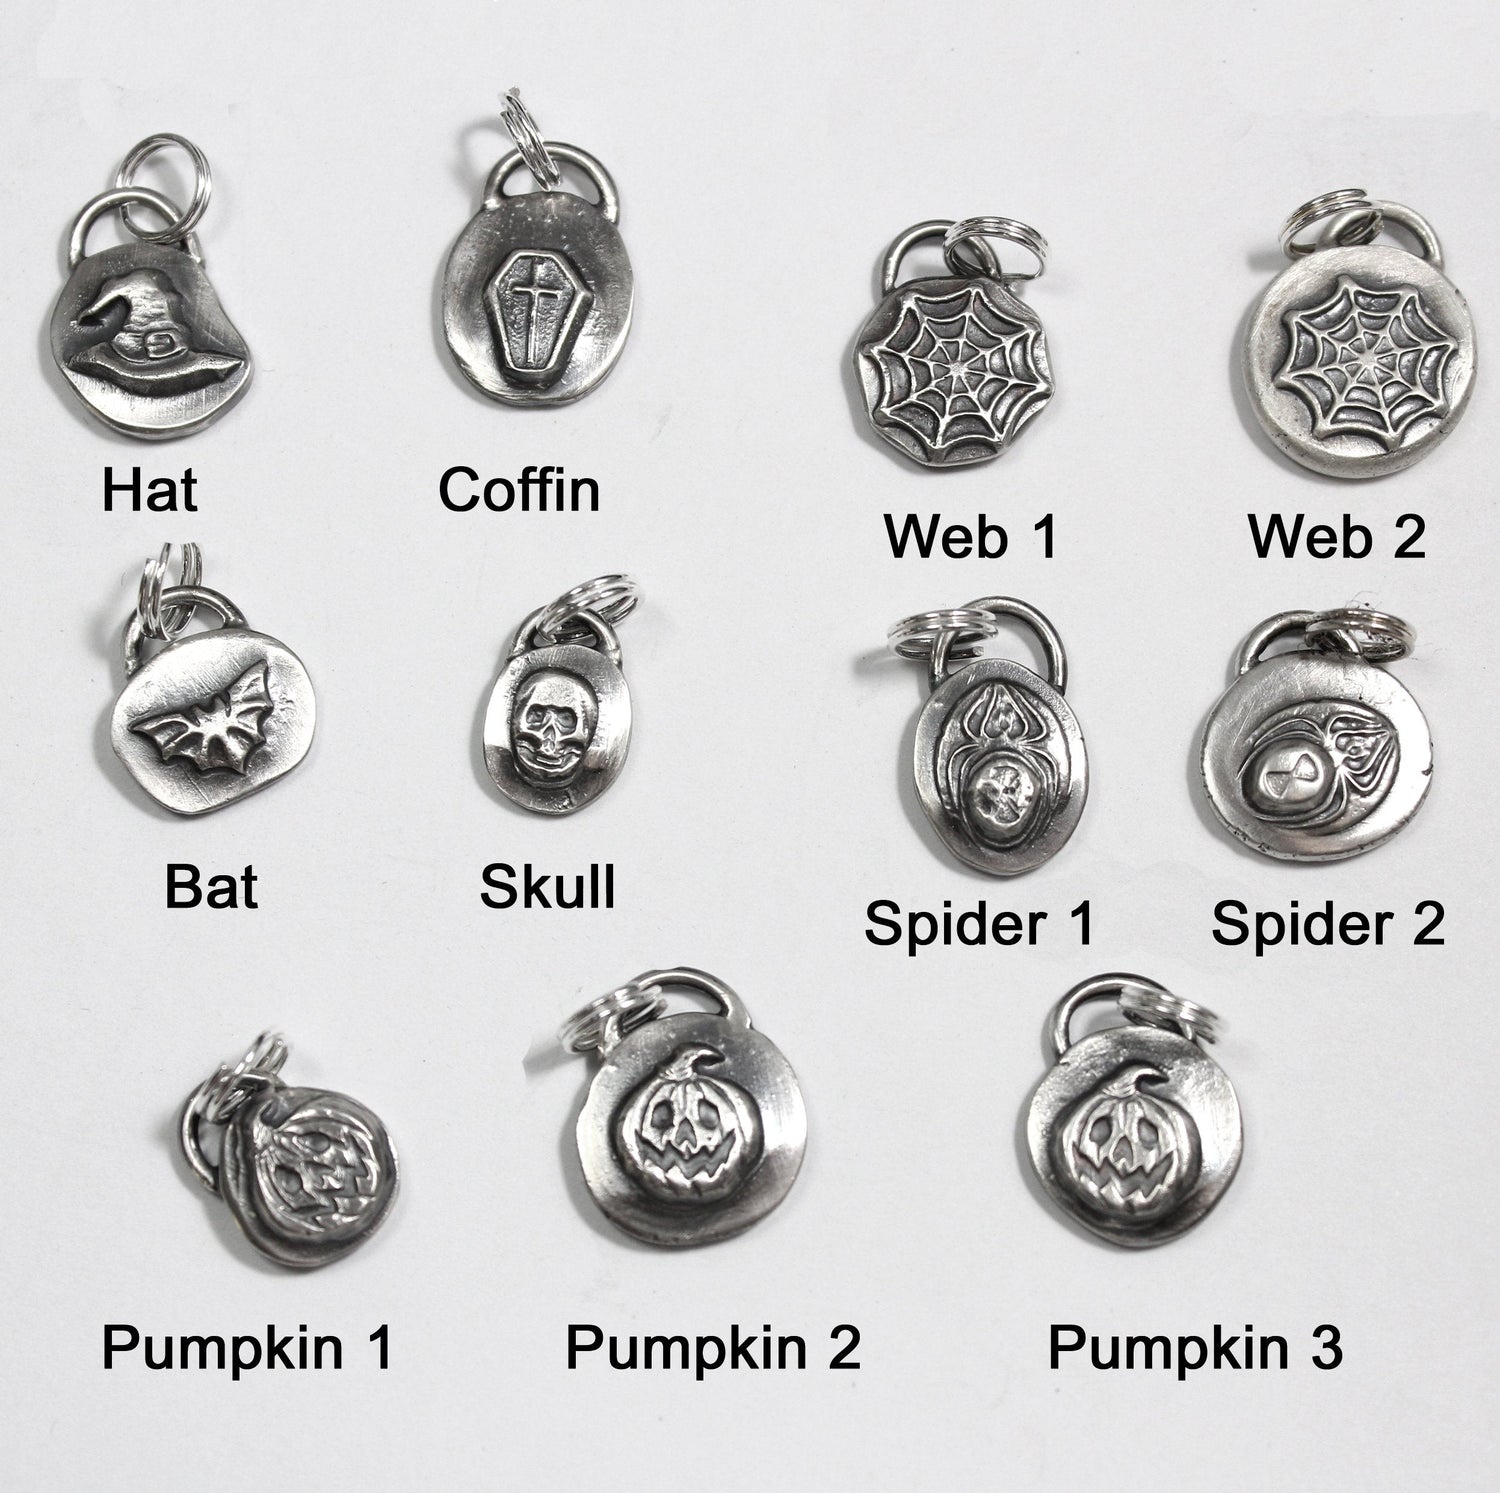 Halloween or Goth inspired sterling silver charms. Each charm is around one half inch, give or take. There's a loop at the top with a sterling silver split ring. The designs are bat, witch hat, coffin with cross, spider web, skull, black widow spider, and jack o lantern. Shown with names of each design.